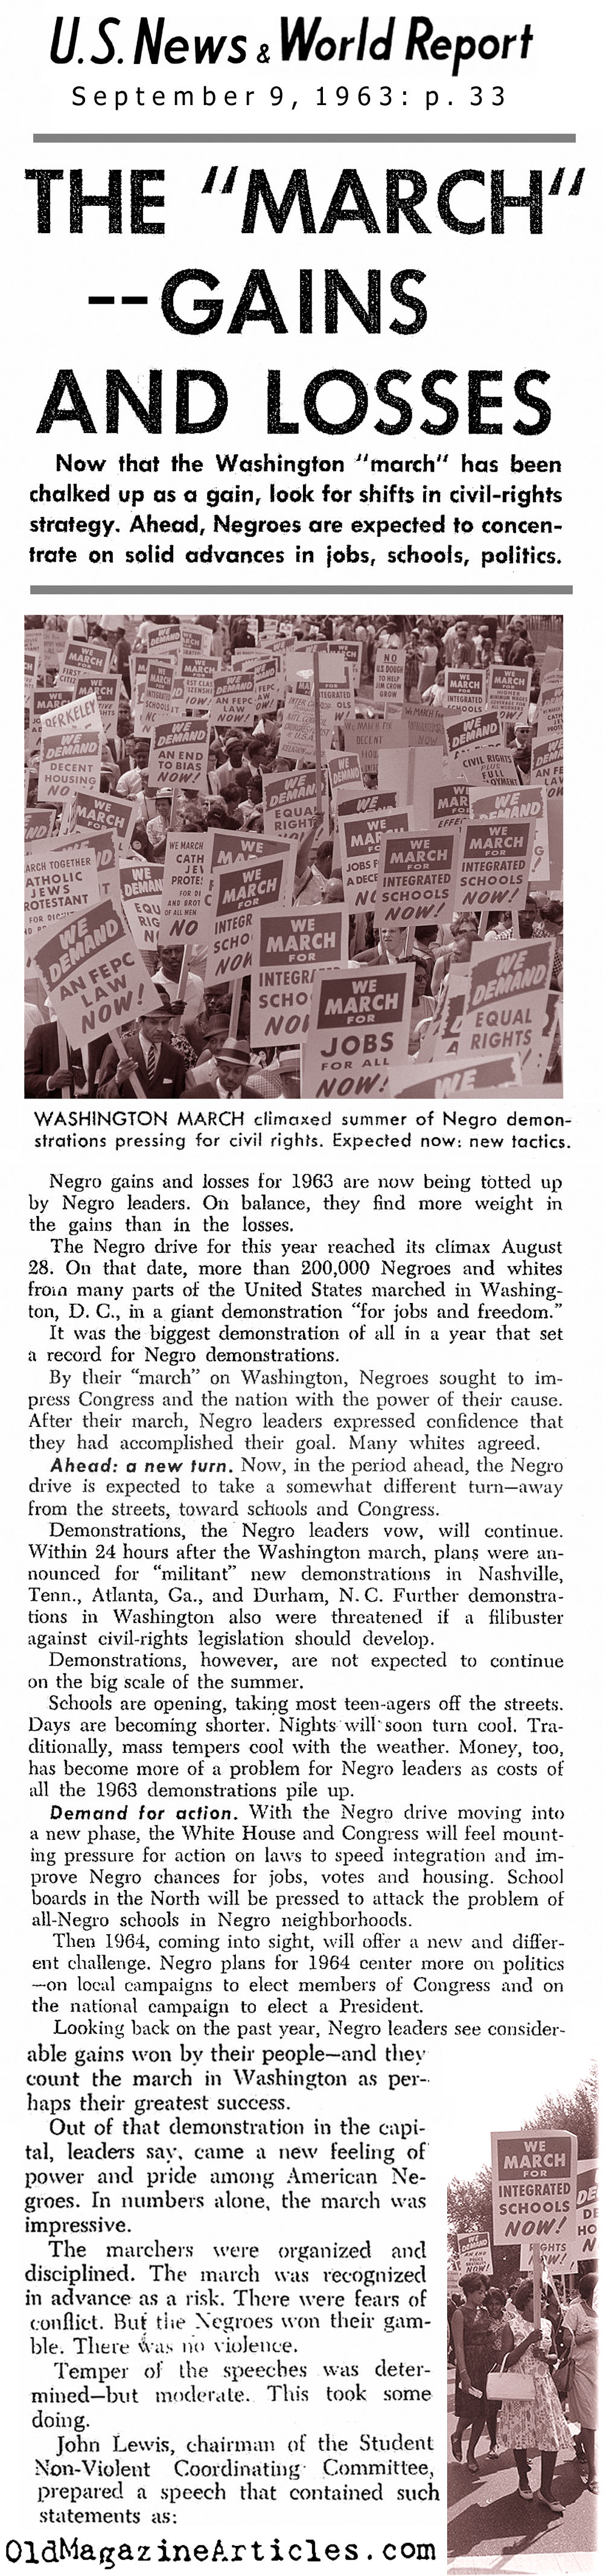 King's March in Washington (United States News, 1963)